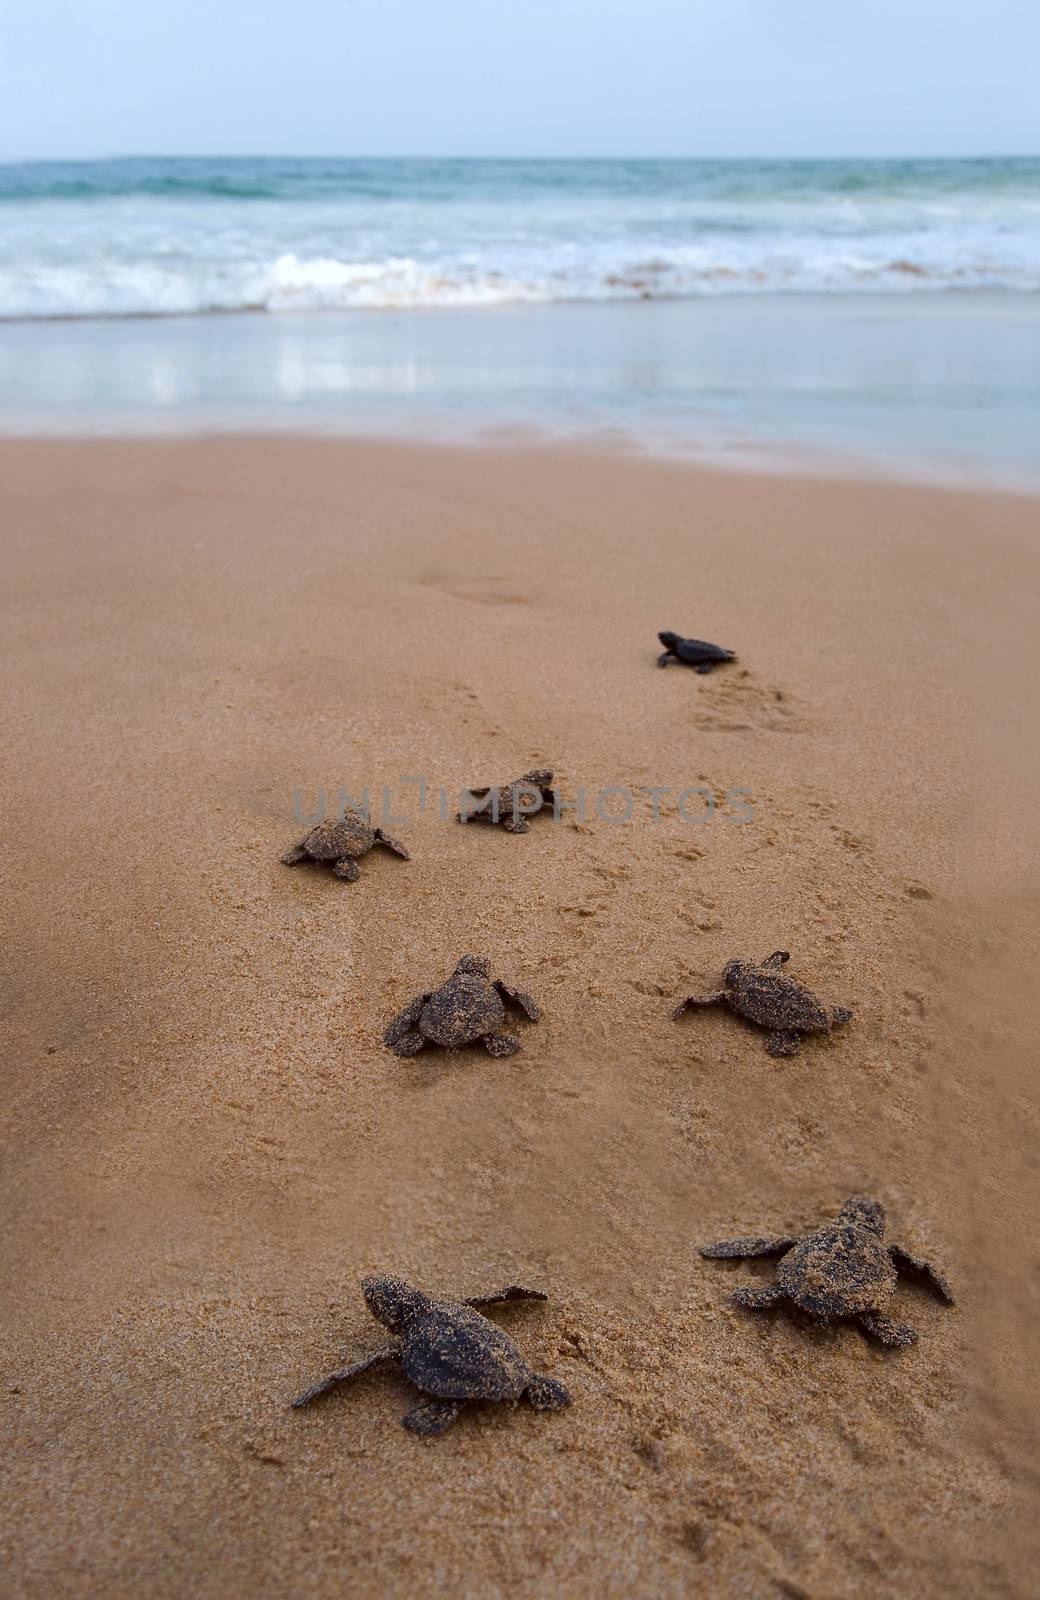 Baby turtles making it's way to the ocean